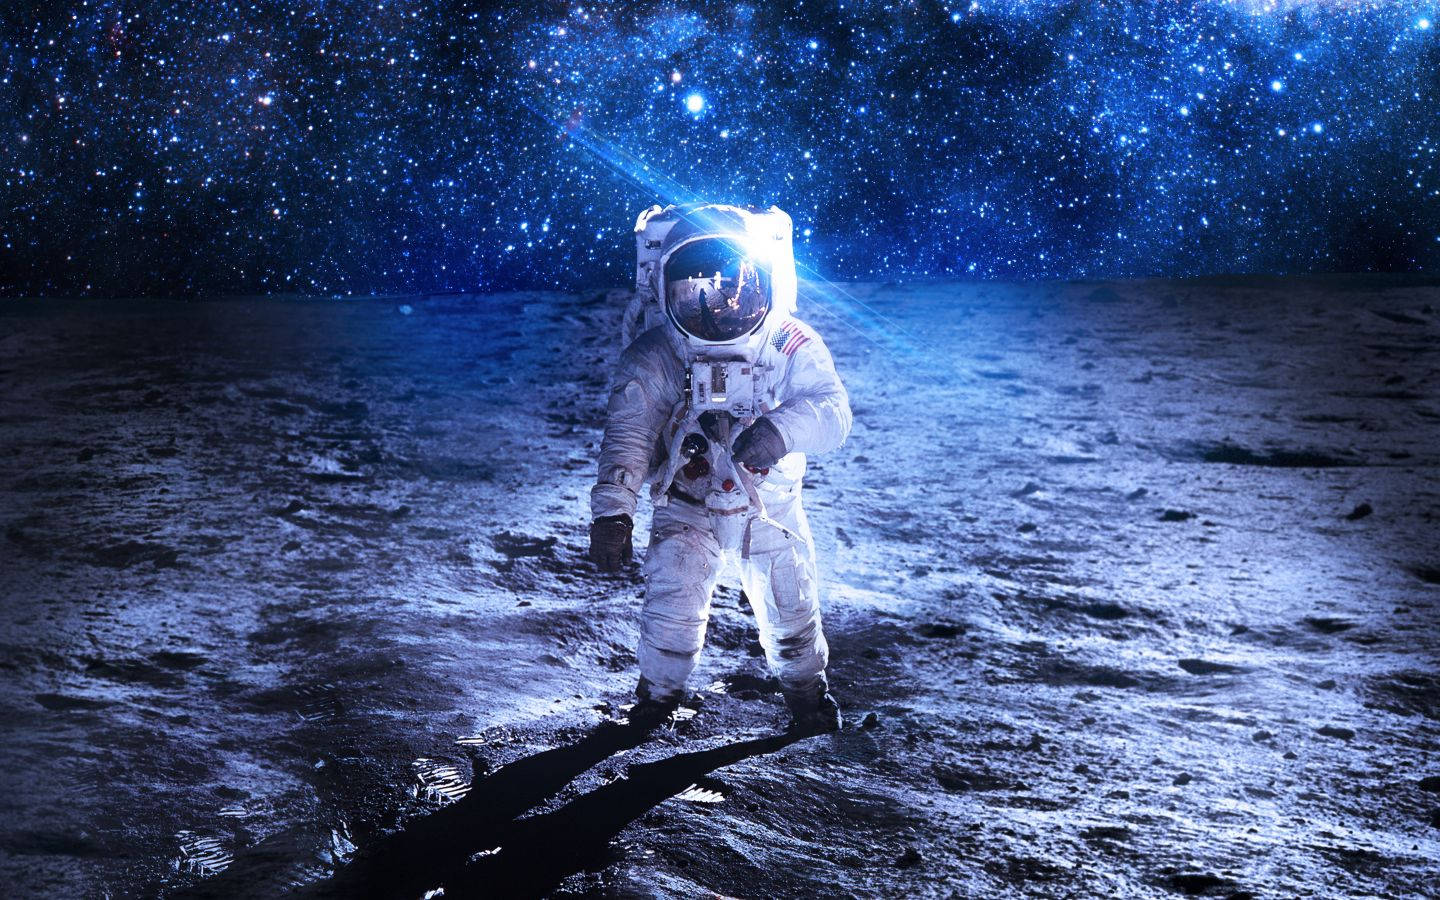 Astronaut Aesthetic Wallpaper Full HD, 4K Free to Use